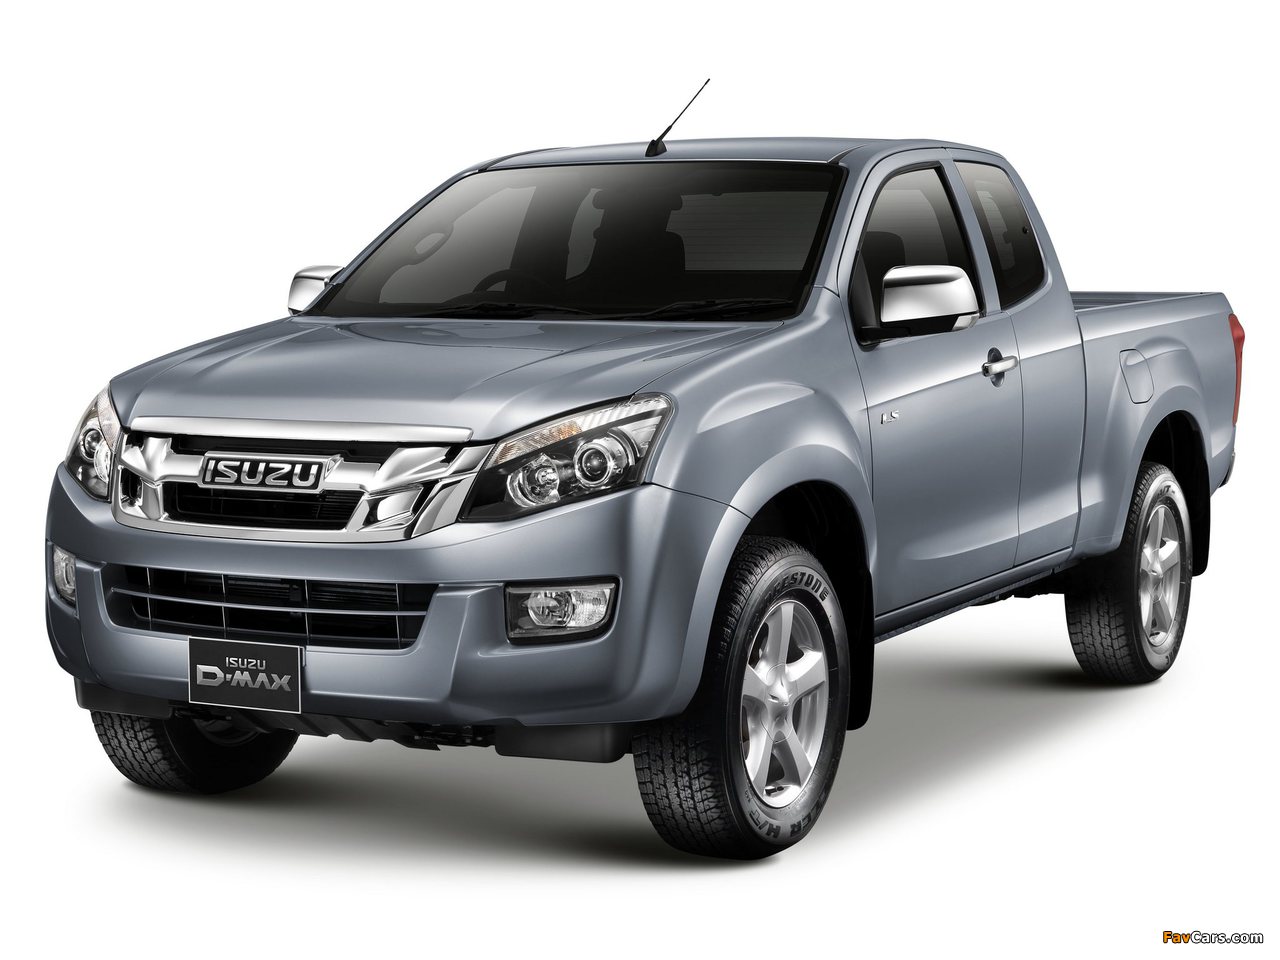 Isuzu D-Max Extended Cab 2012 pictures (1280 x 960)